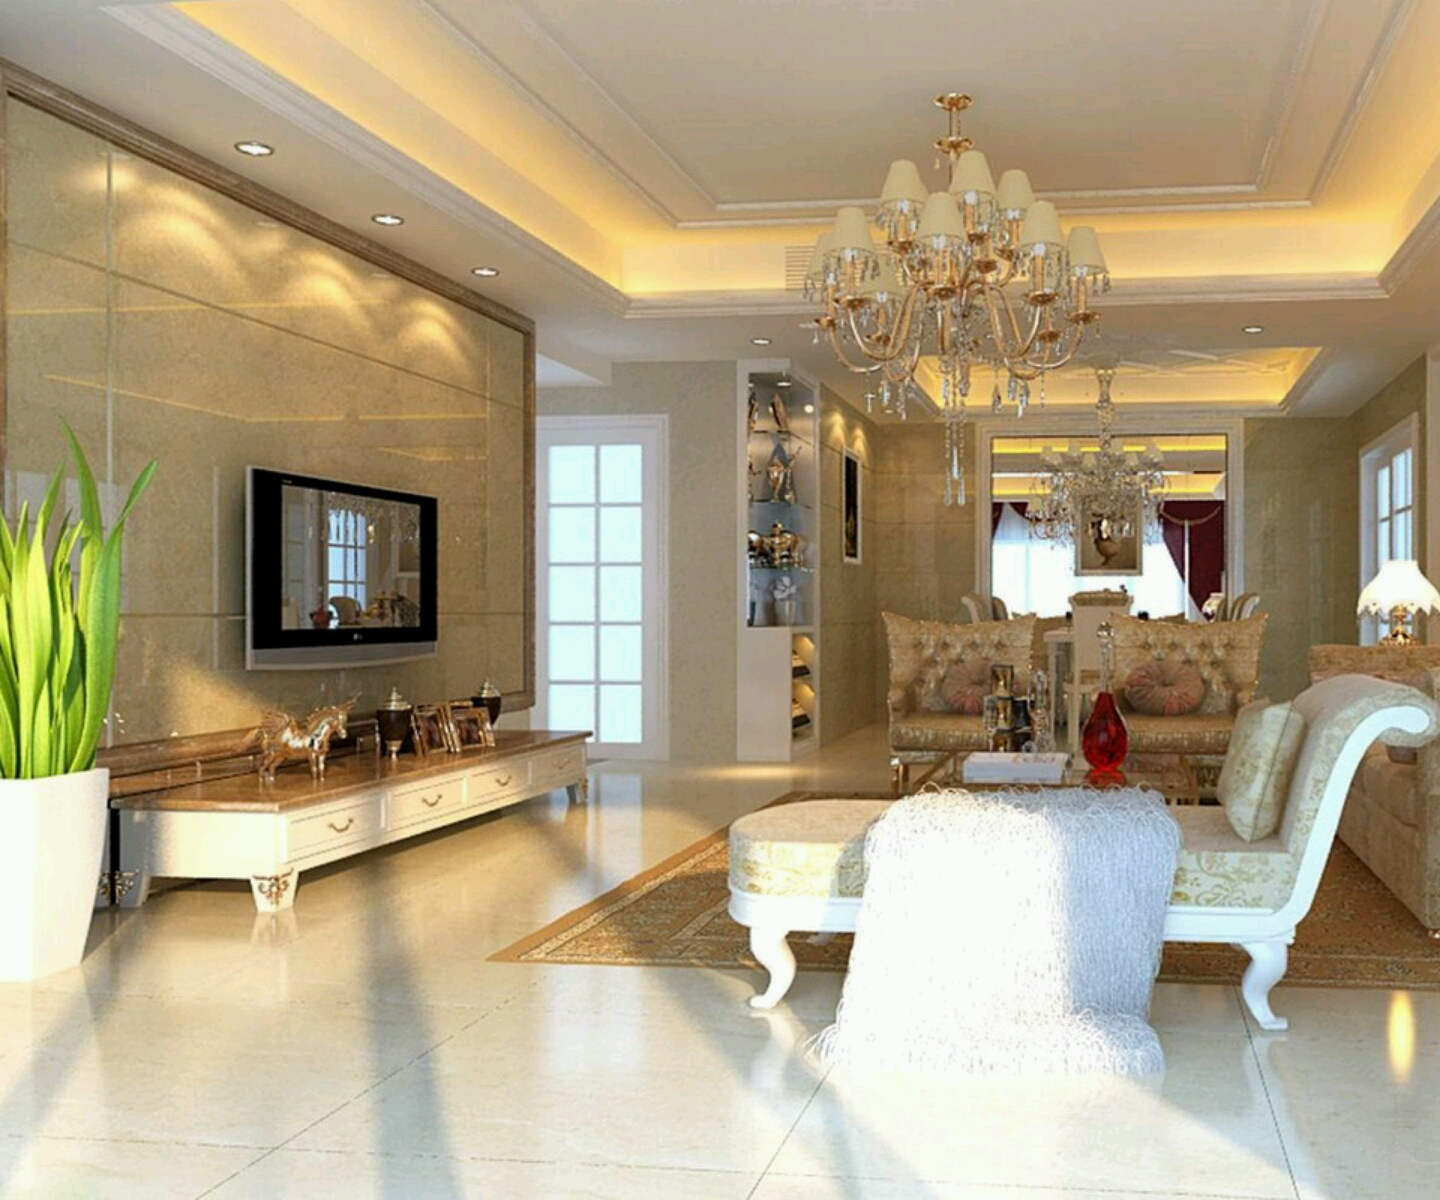 New home designs latest.: Luxury homes interior decoration living room ...